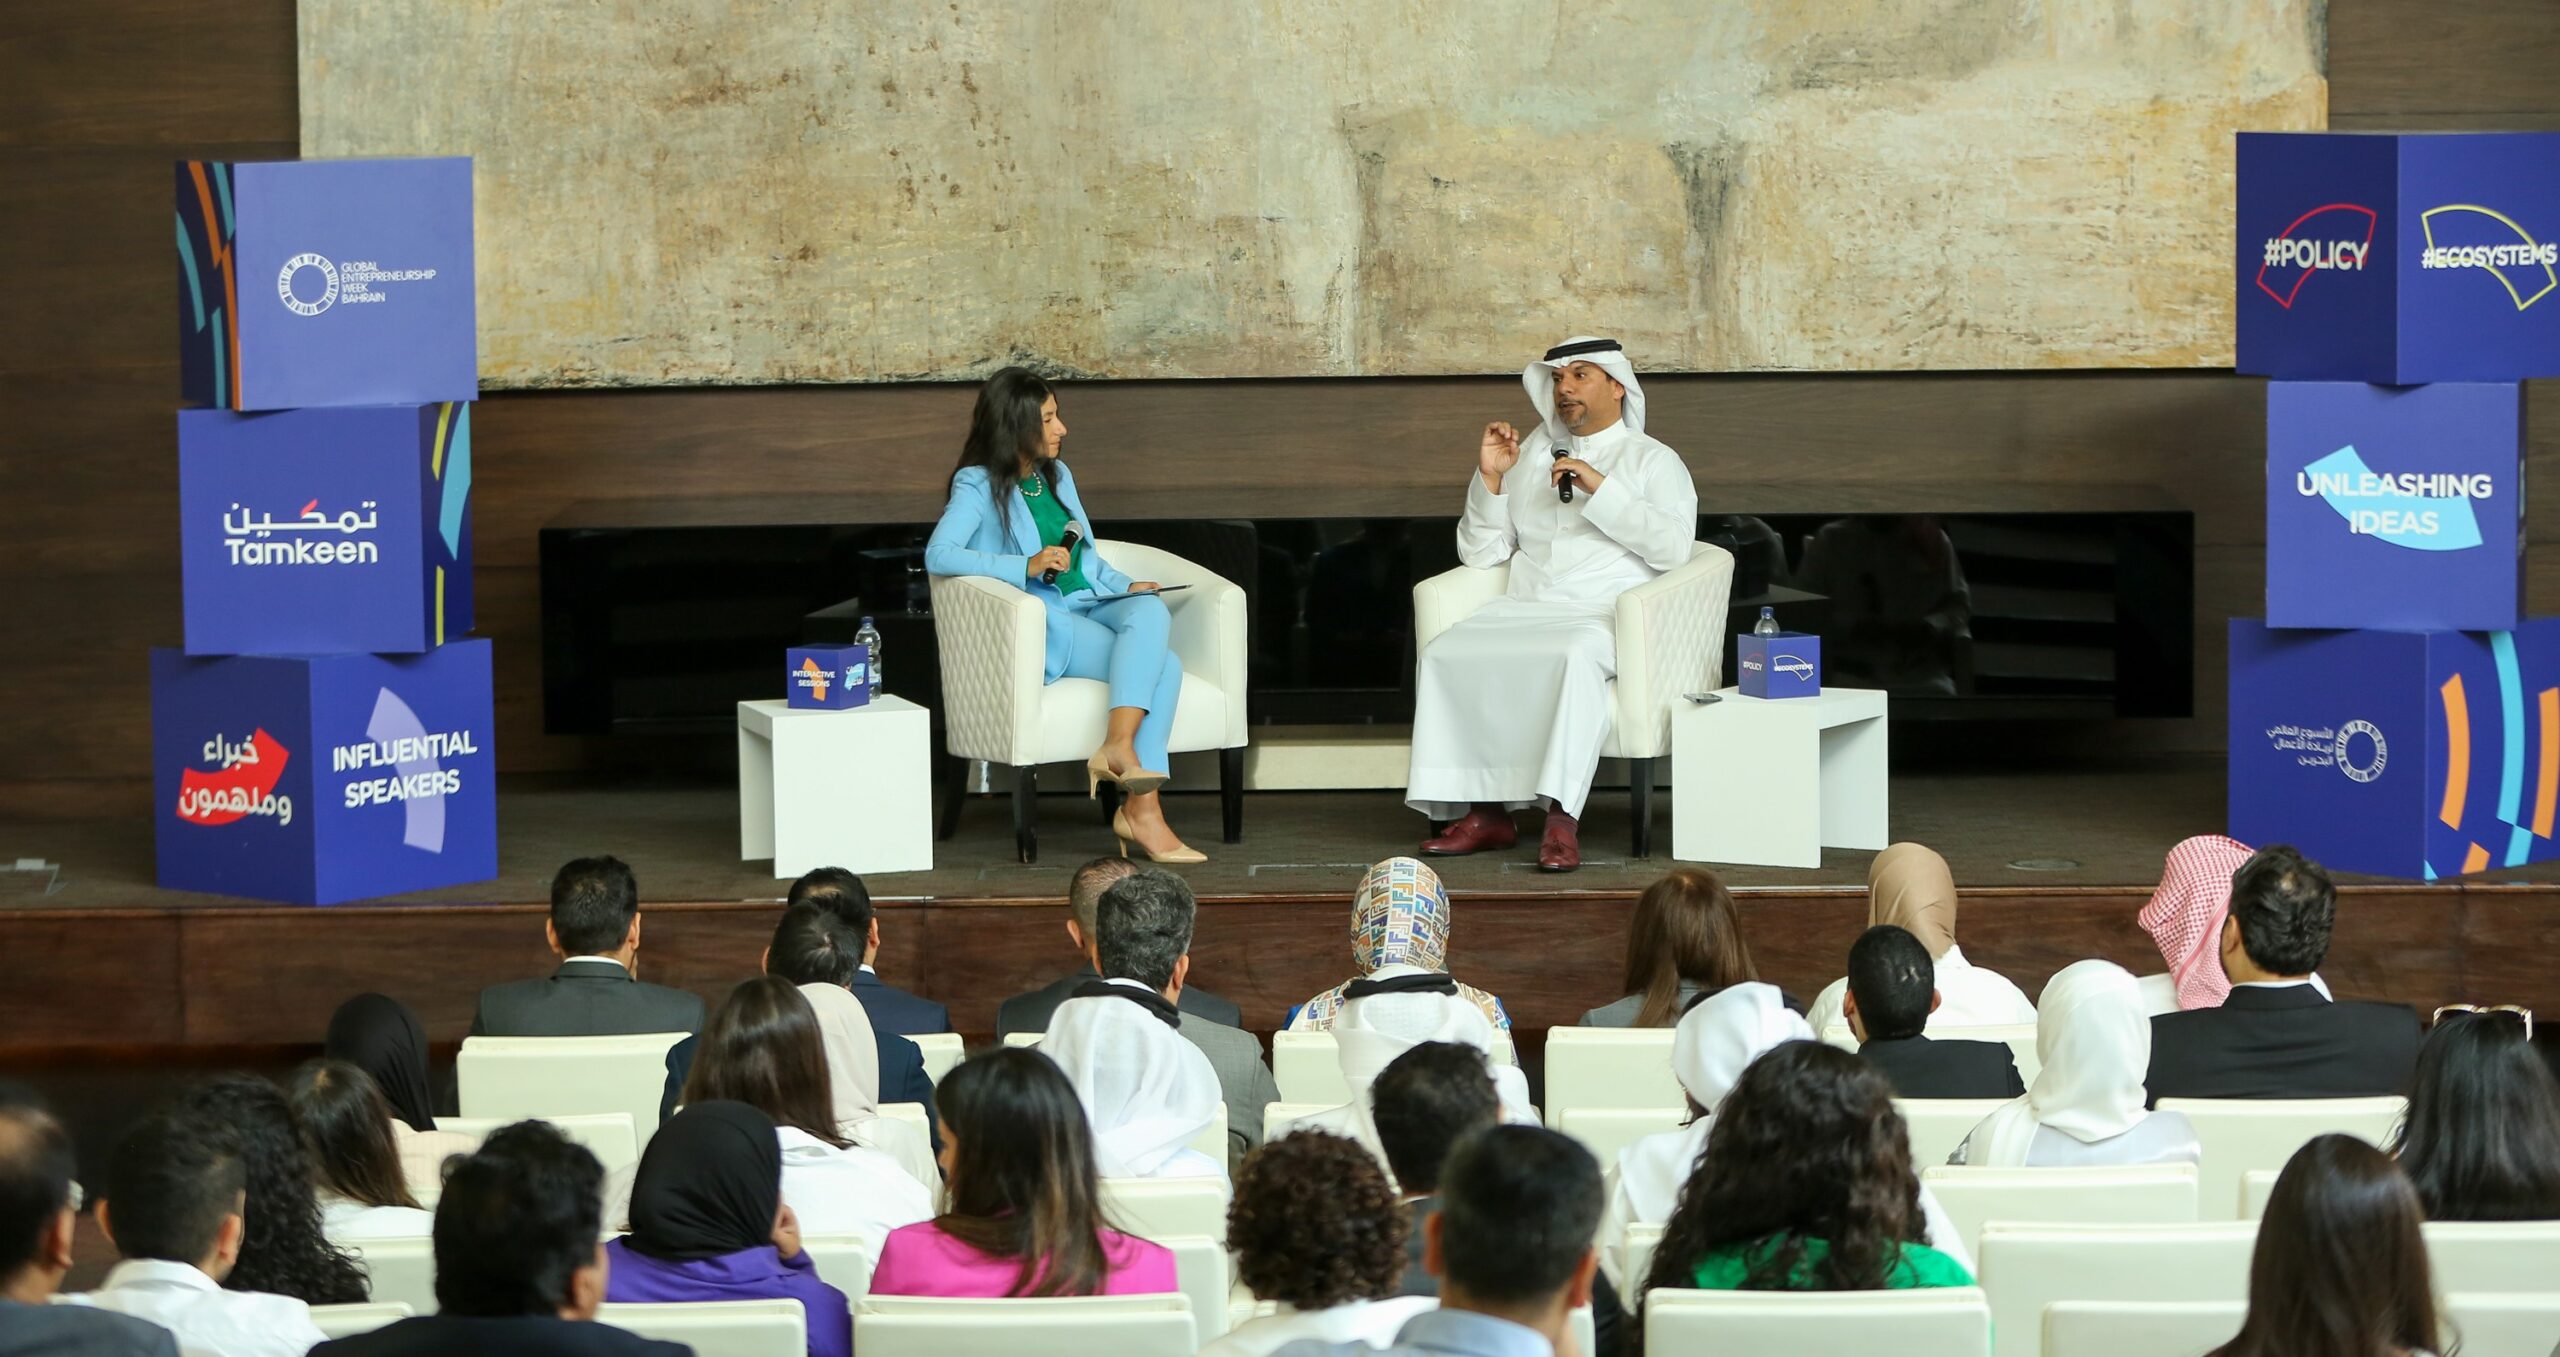 Tamkeen wraps up Global Entrepreneurship Week (GEW) which saw over 750 participants attend and 28 local and international speakers